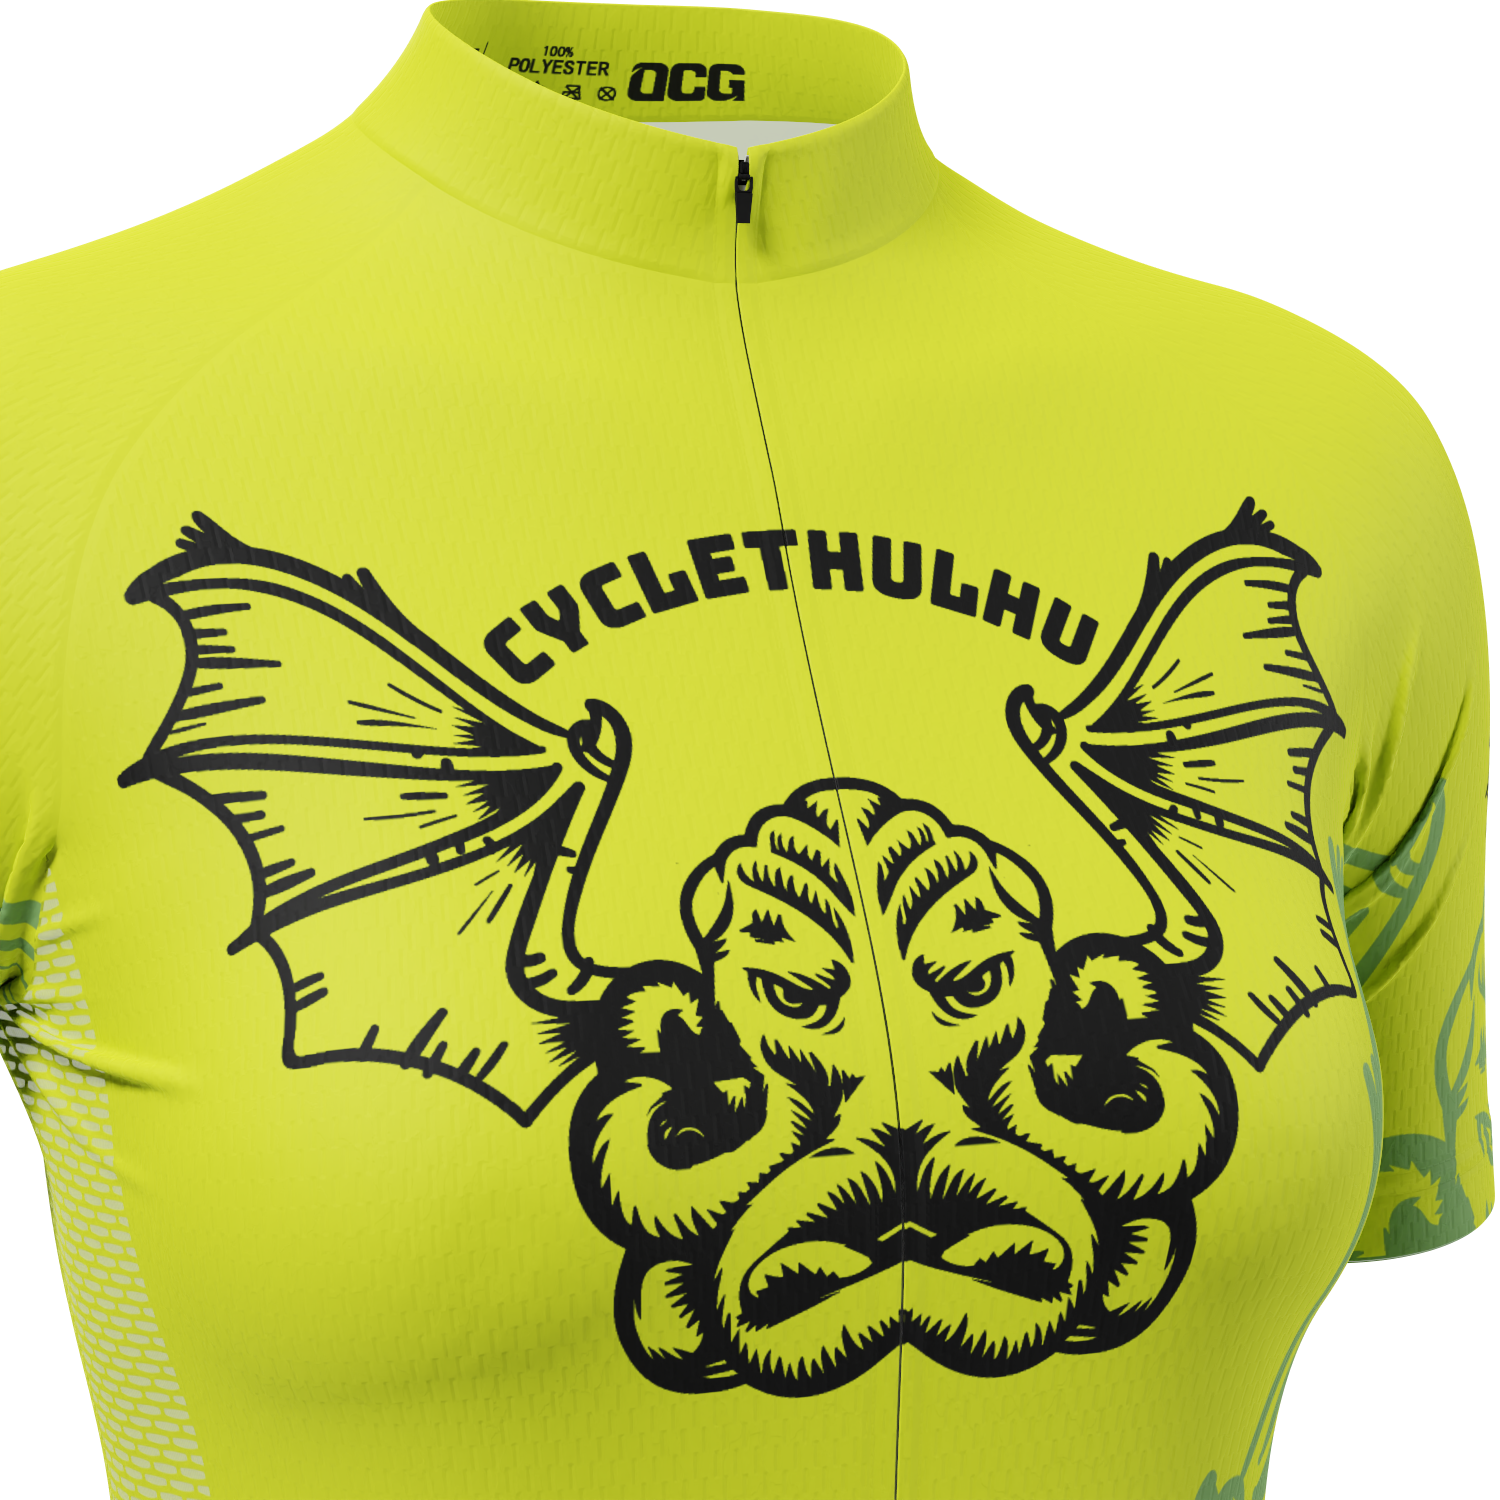 Women's Cyclethulhu Short Sleeve Cycling Jersey